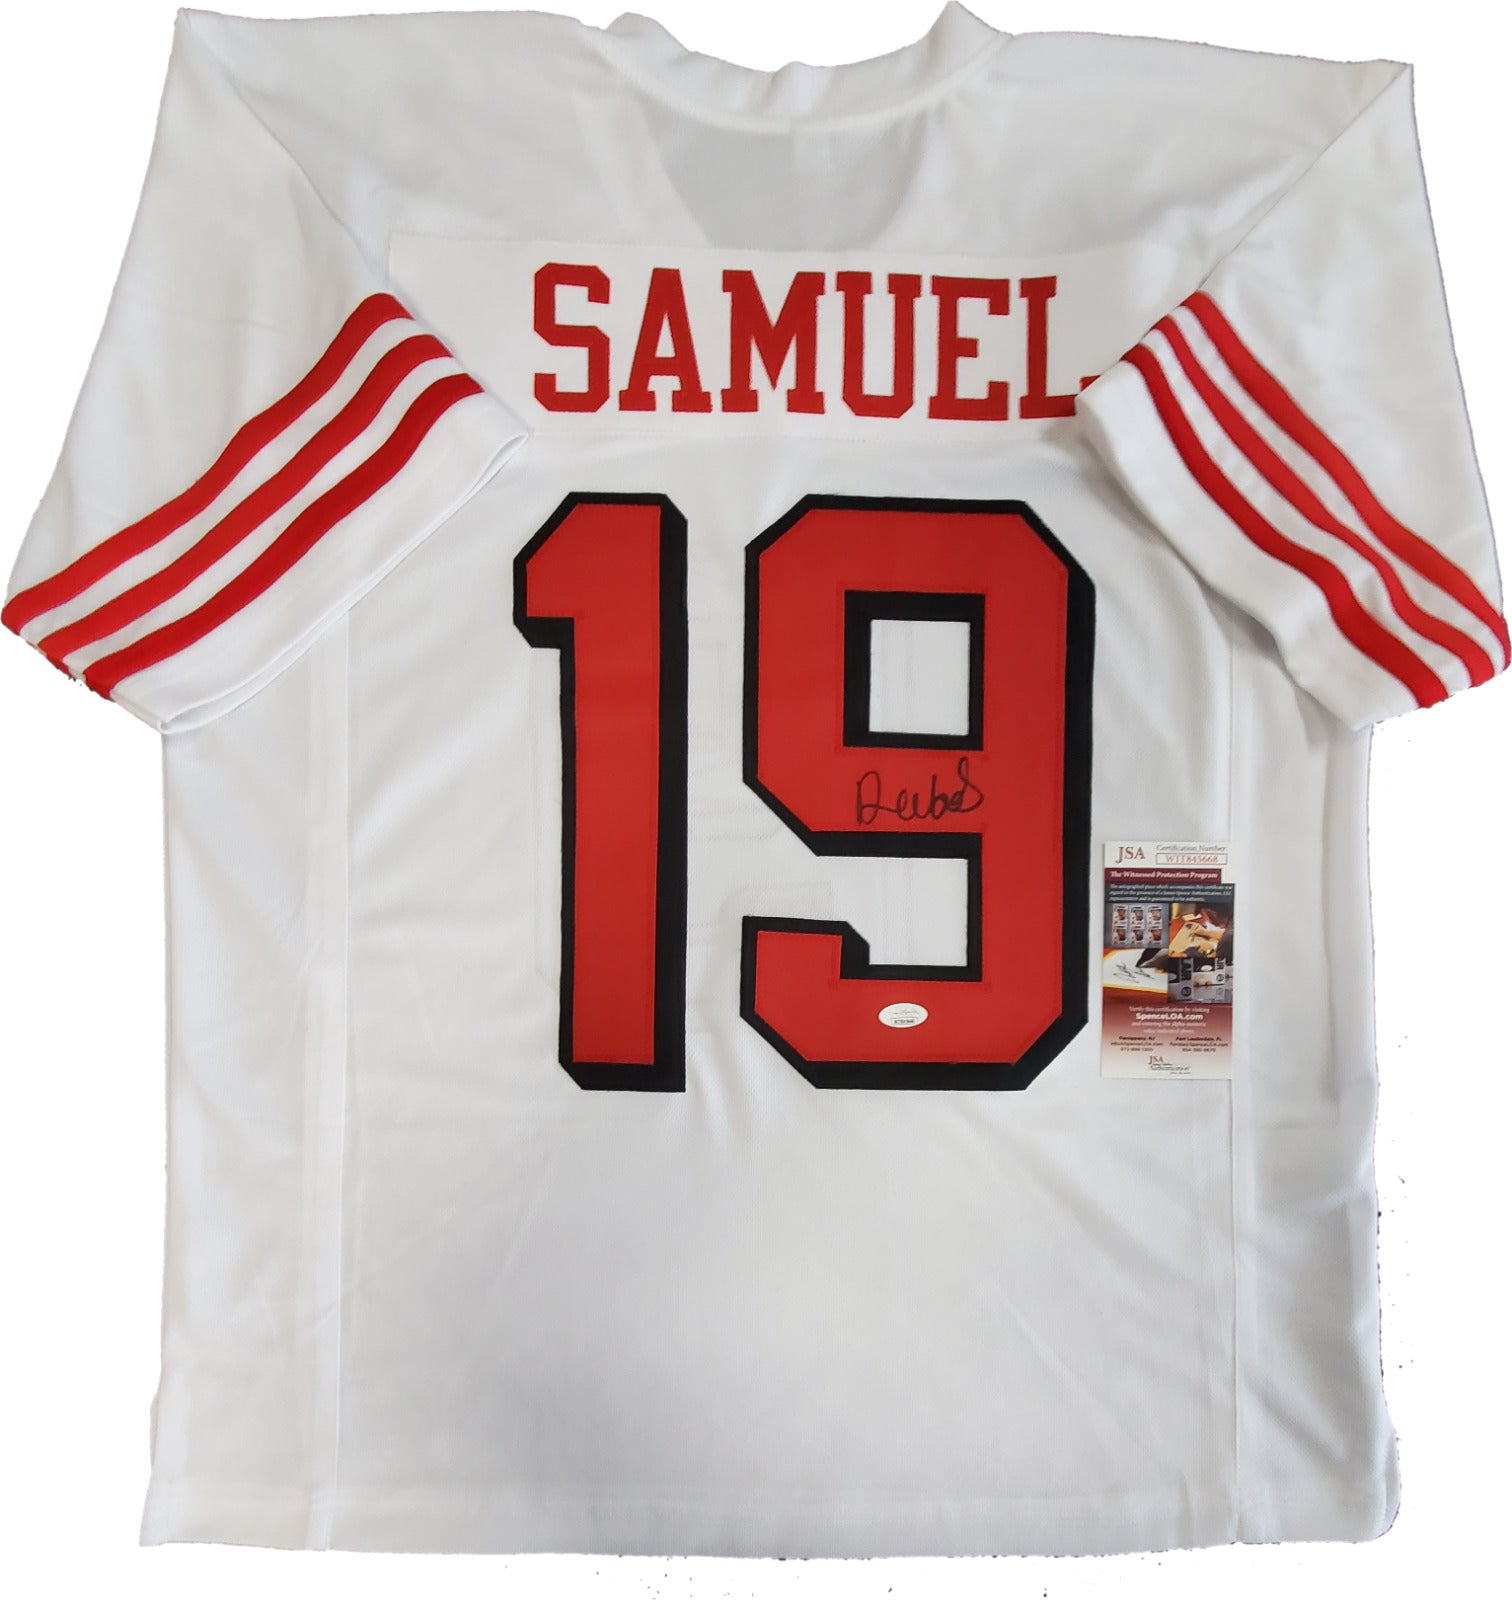 49ers jersey color